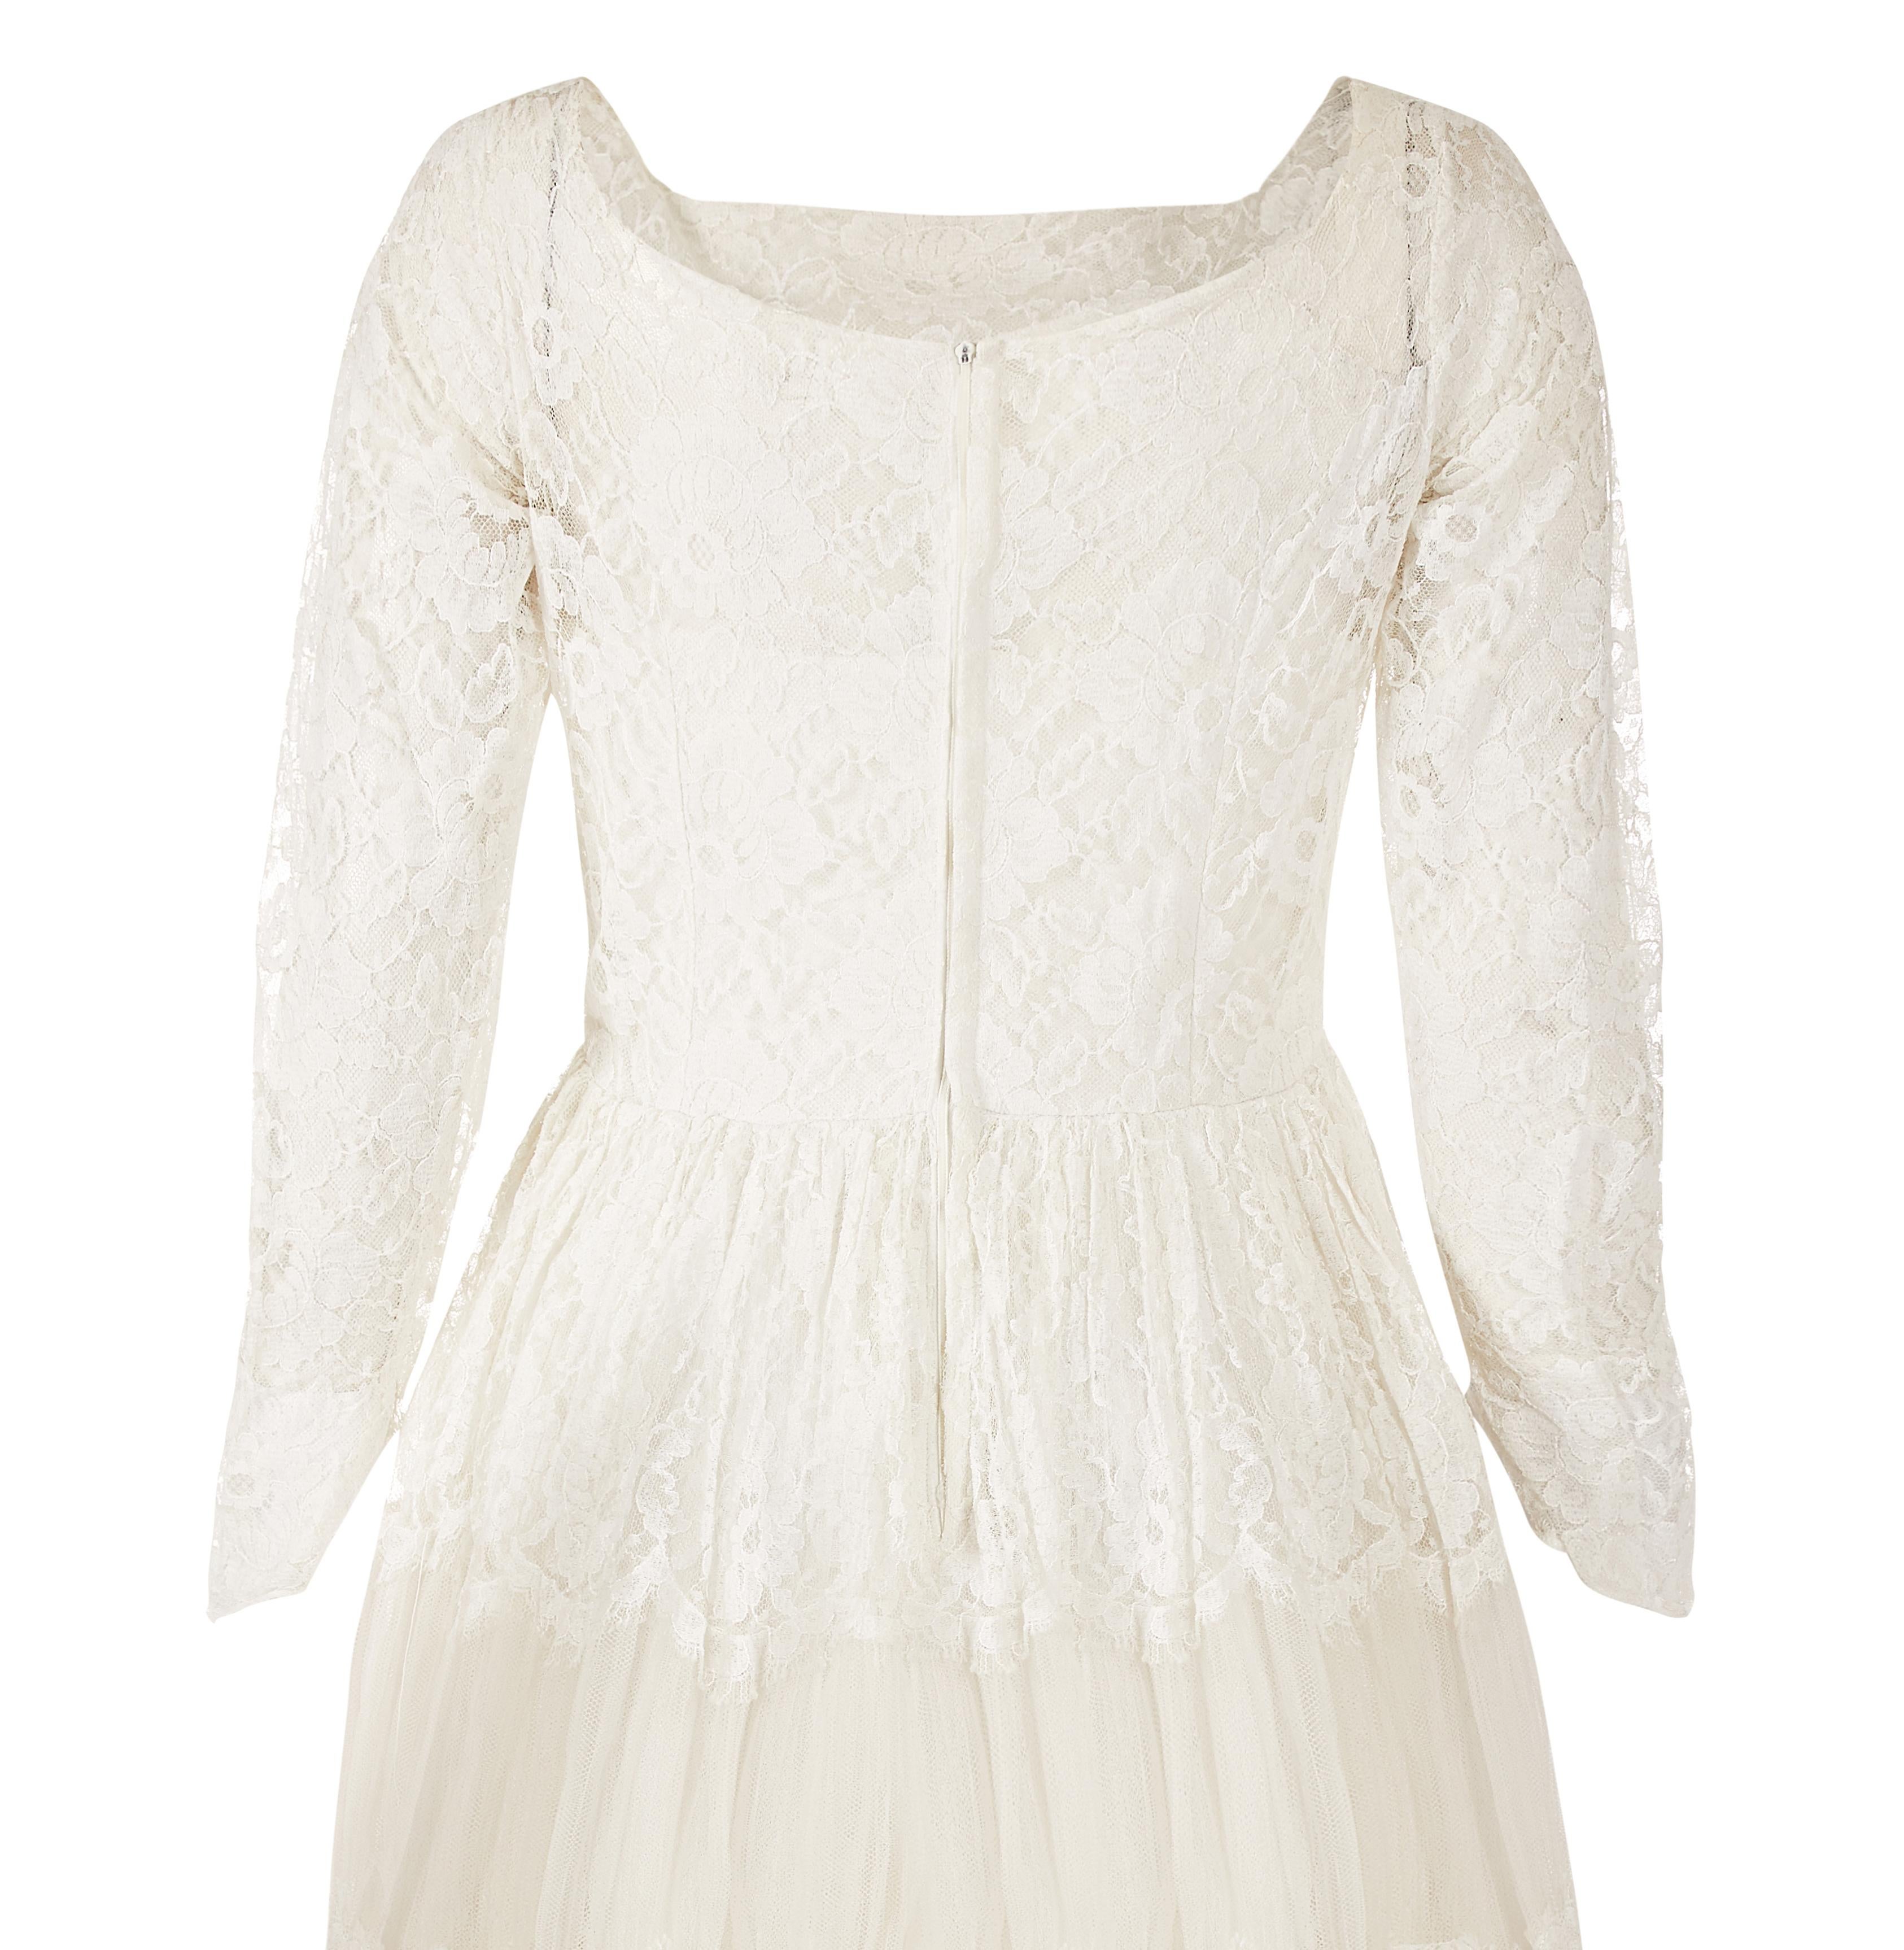 Women's 1960s White Chantilly Style Lace Tiered Wedding Dress  For Sale